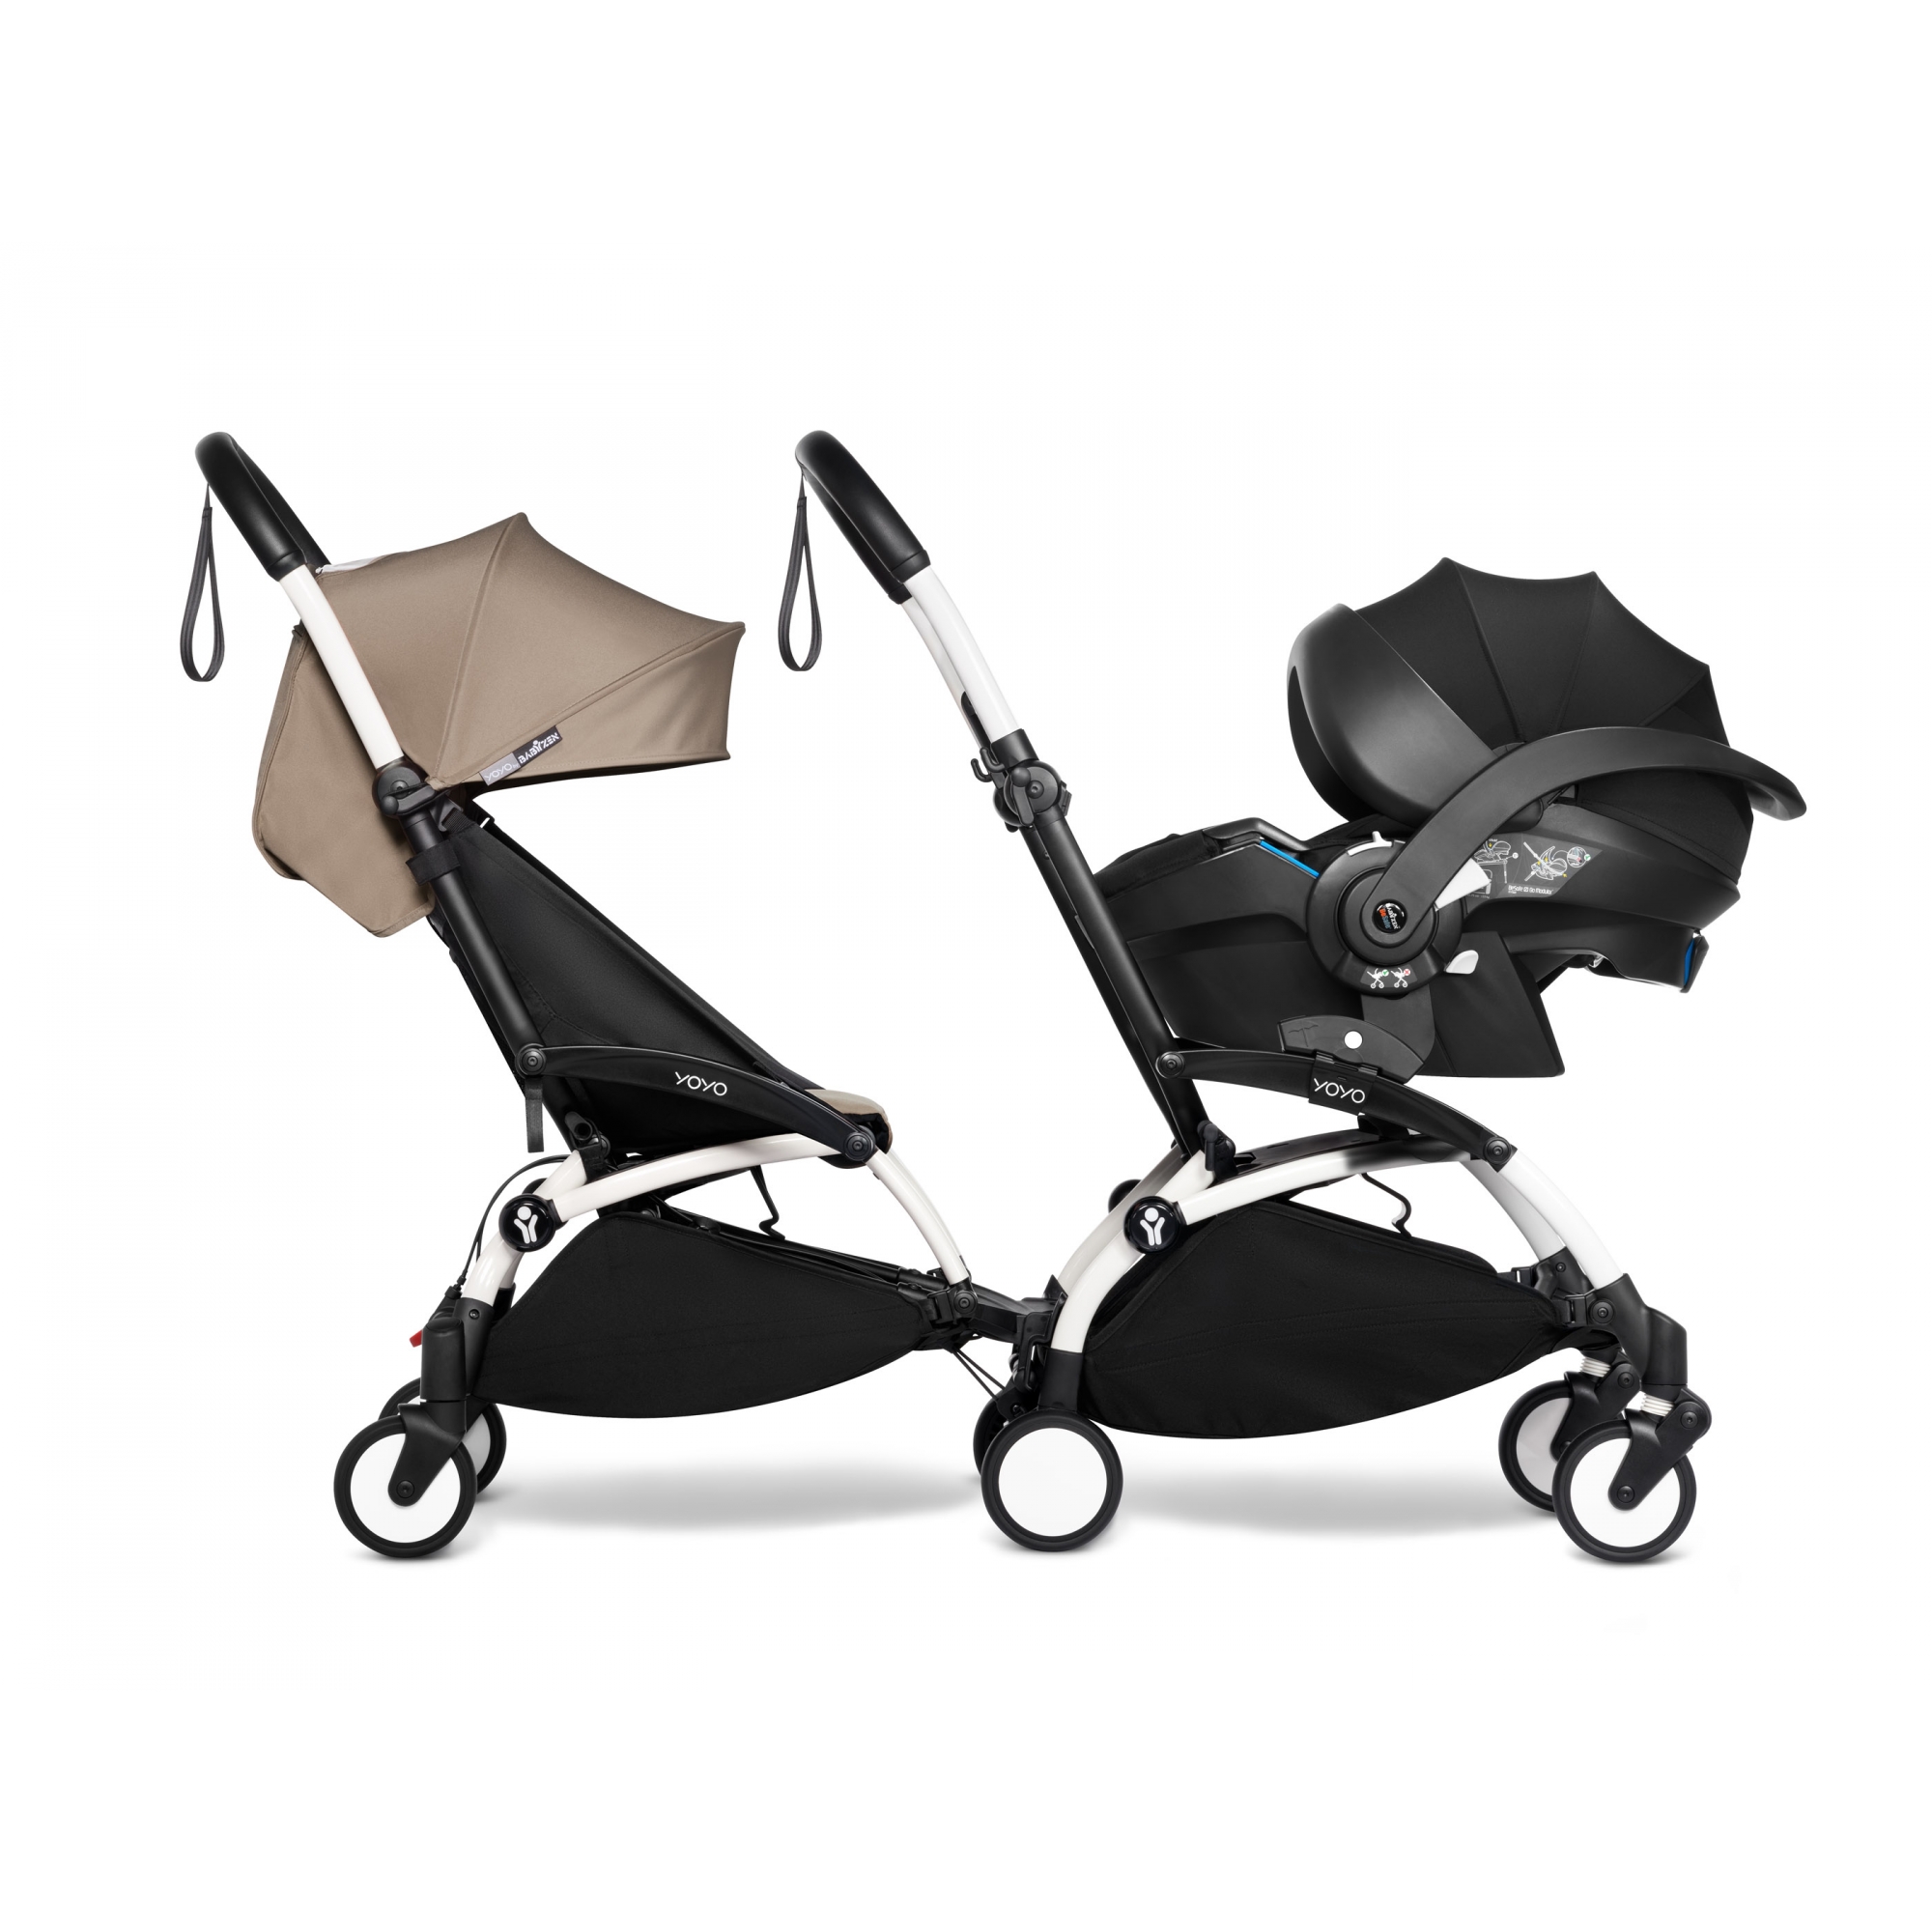 Pack poussette double Trio YOYO² Connect pack 6+ + Yoyo car seat by Besafe  + Nacelle + Ombrelle - Cadre Blanc - Taupe - Made in Bébé